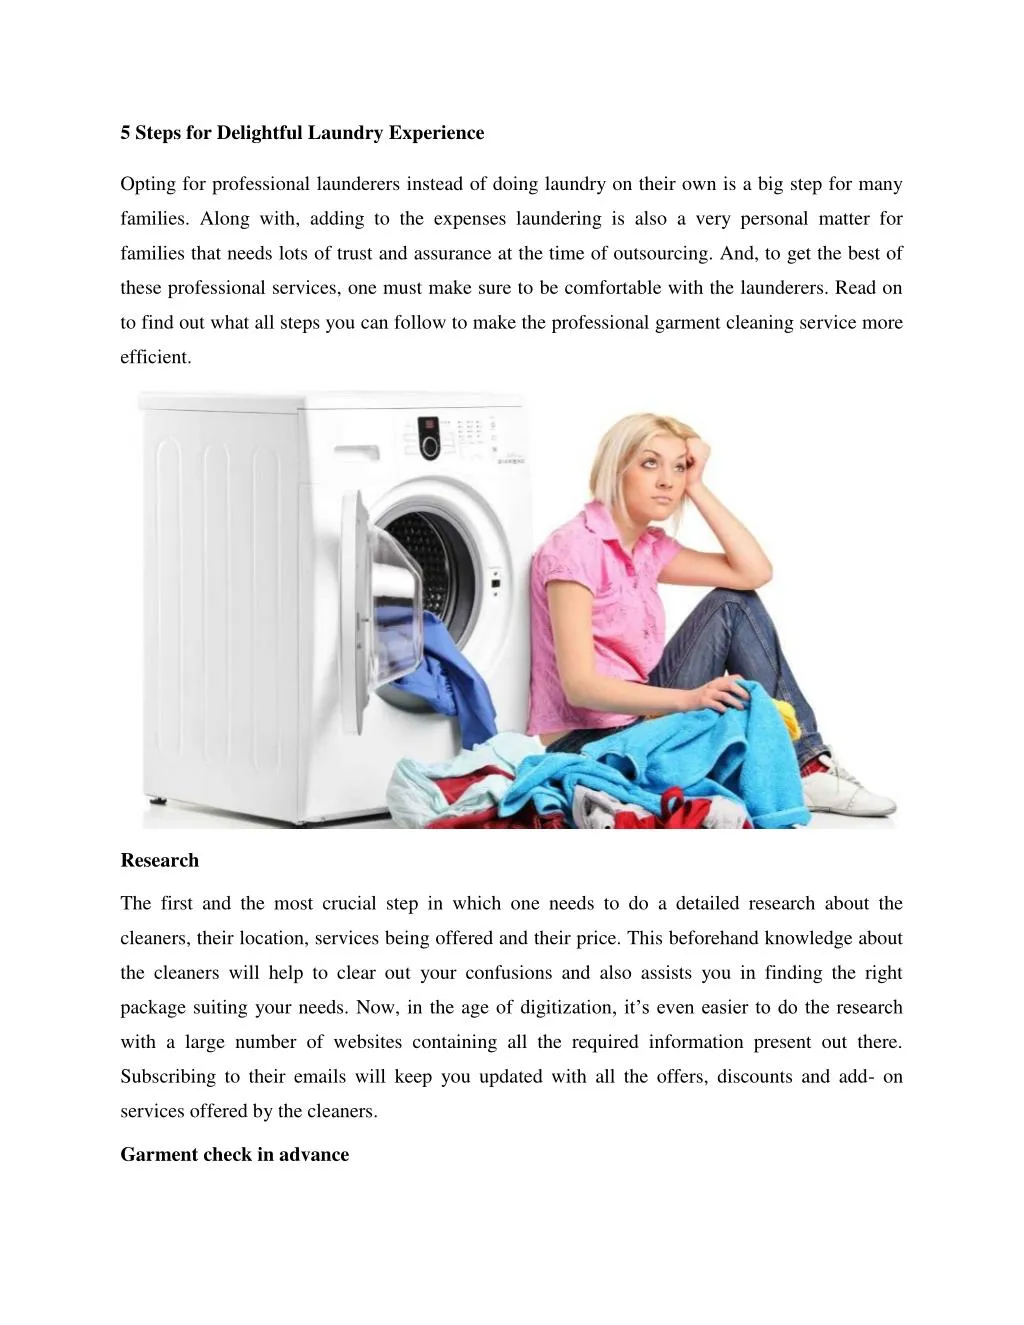 5 steps for delightful laundry experience